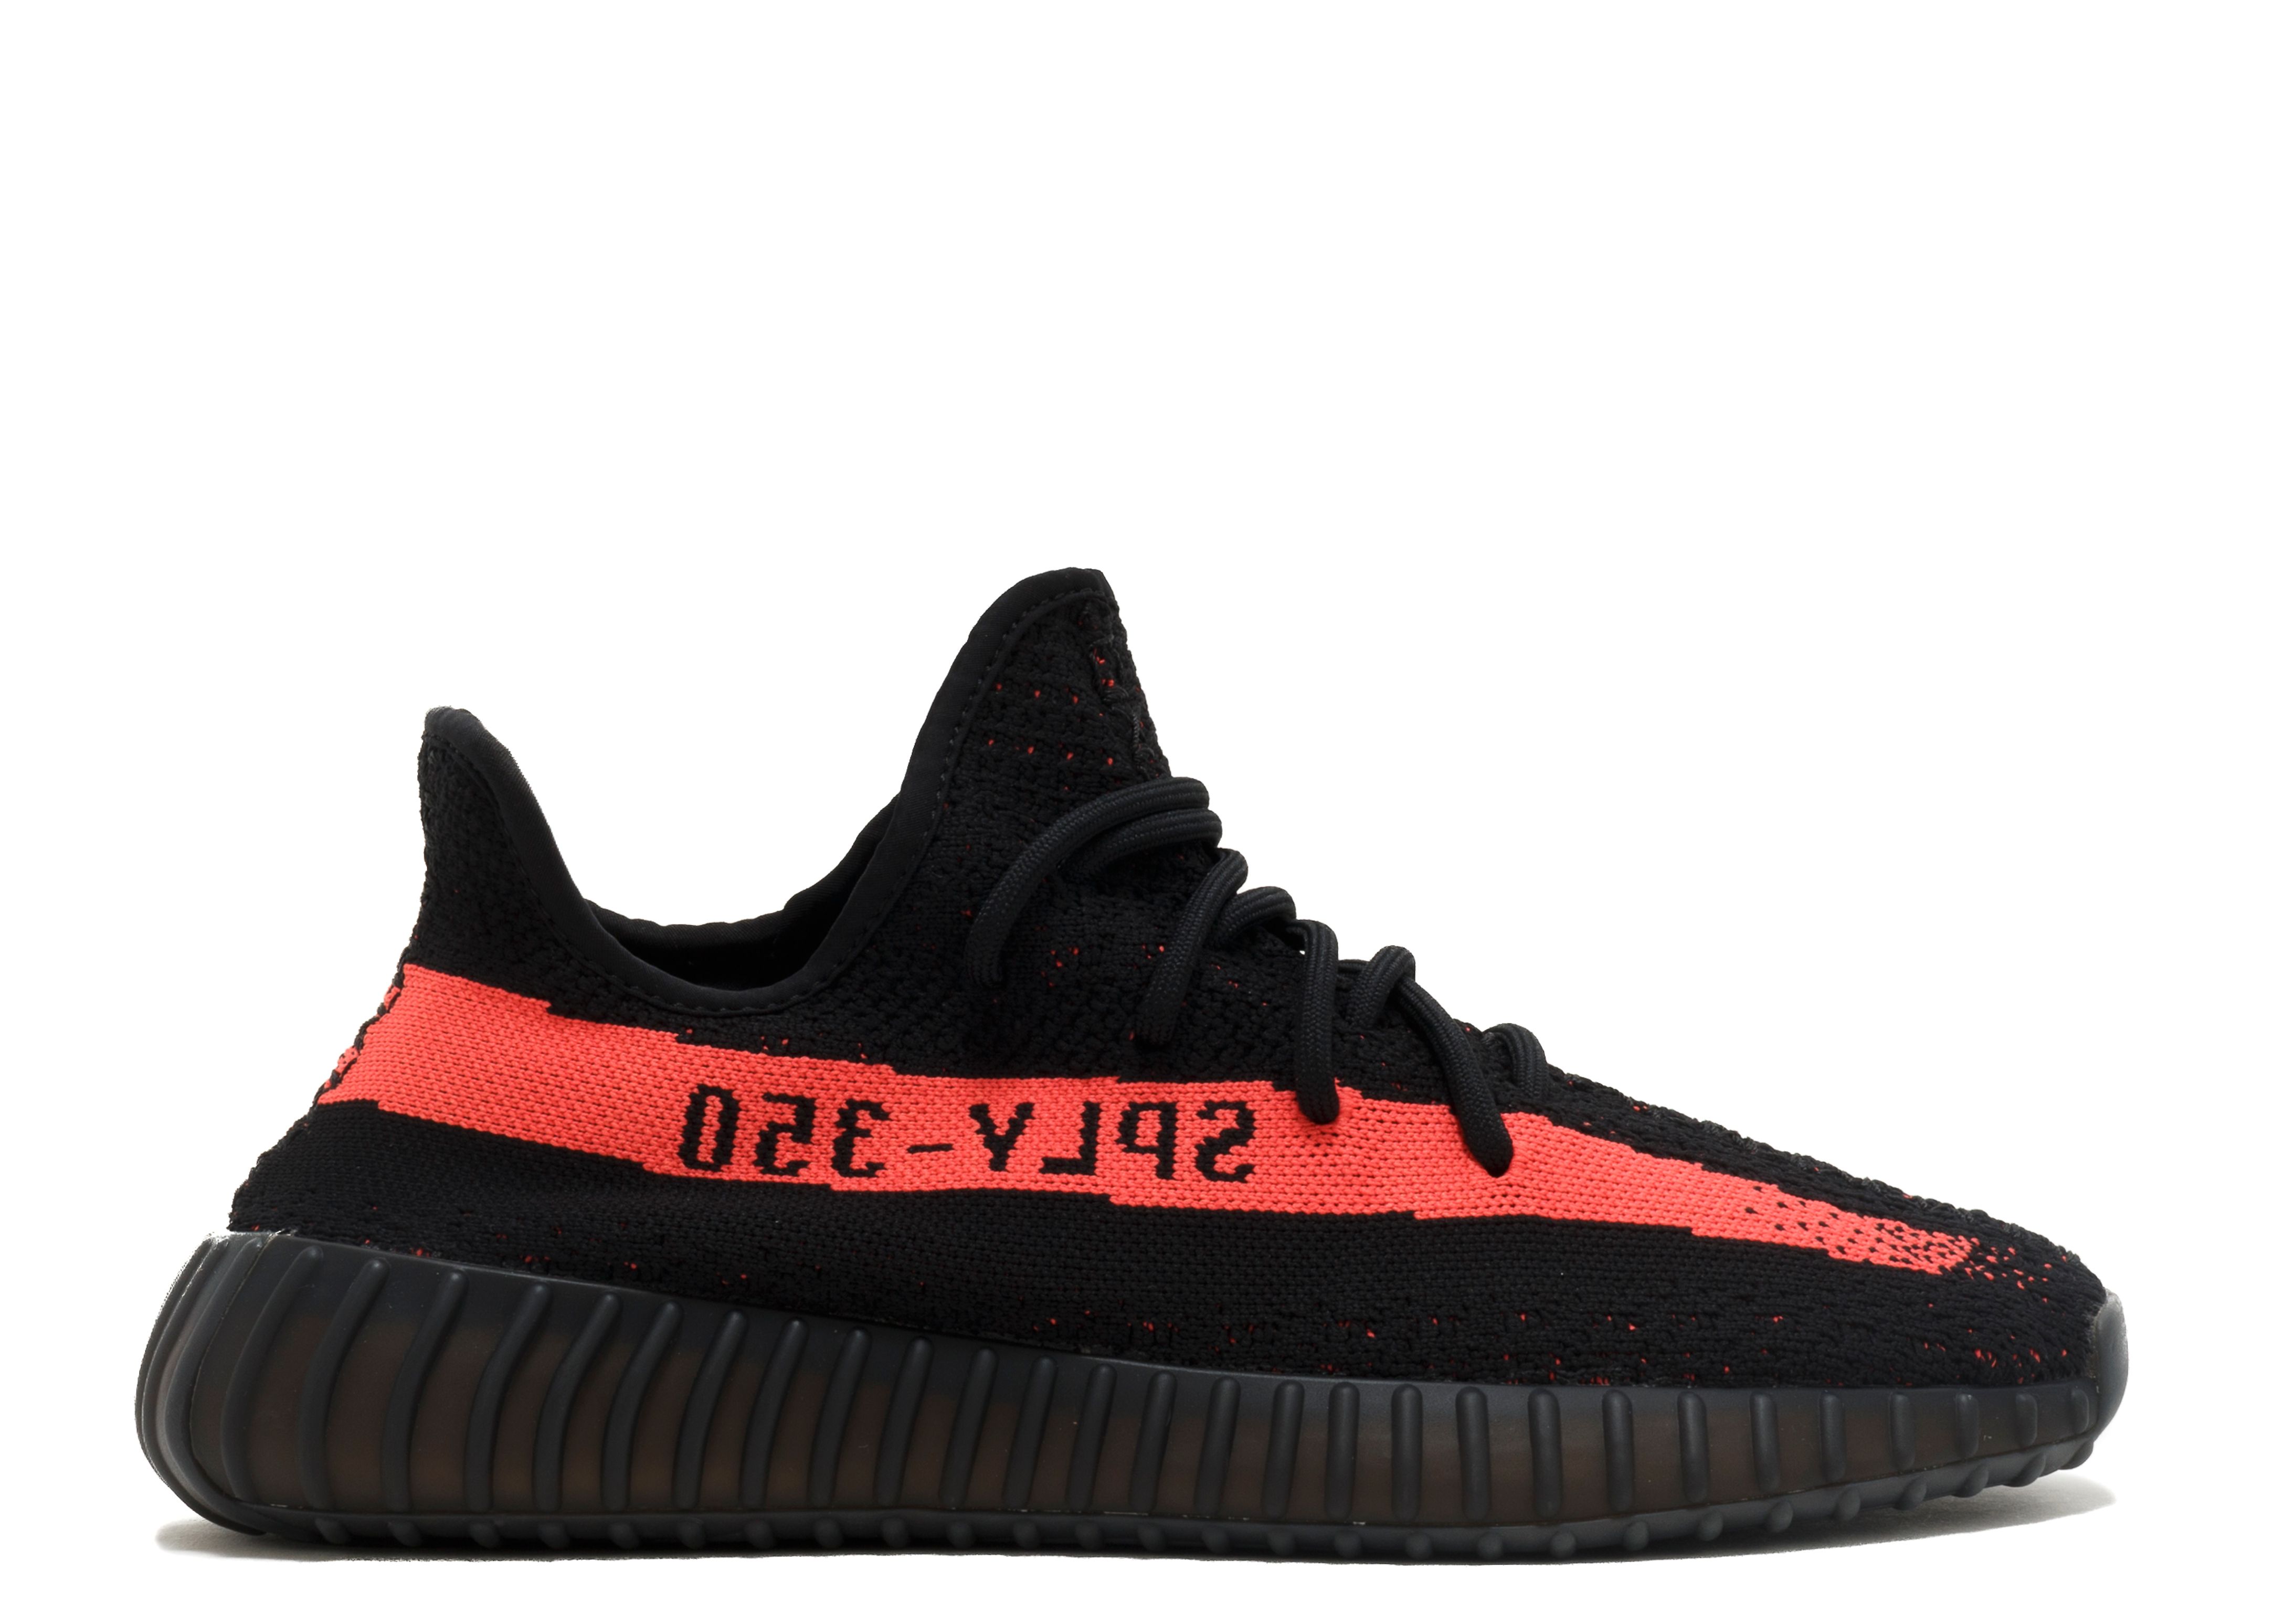 Making Laboratory Be satisfied Yeezy Boost 350 V2 'Red' - Adidas - BY9612 - core black/red/core black |  Flight Club